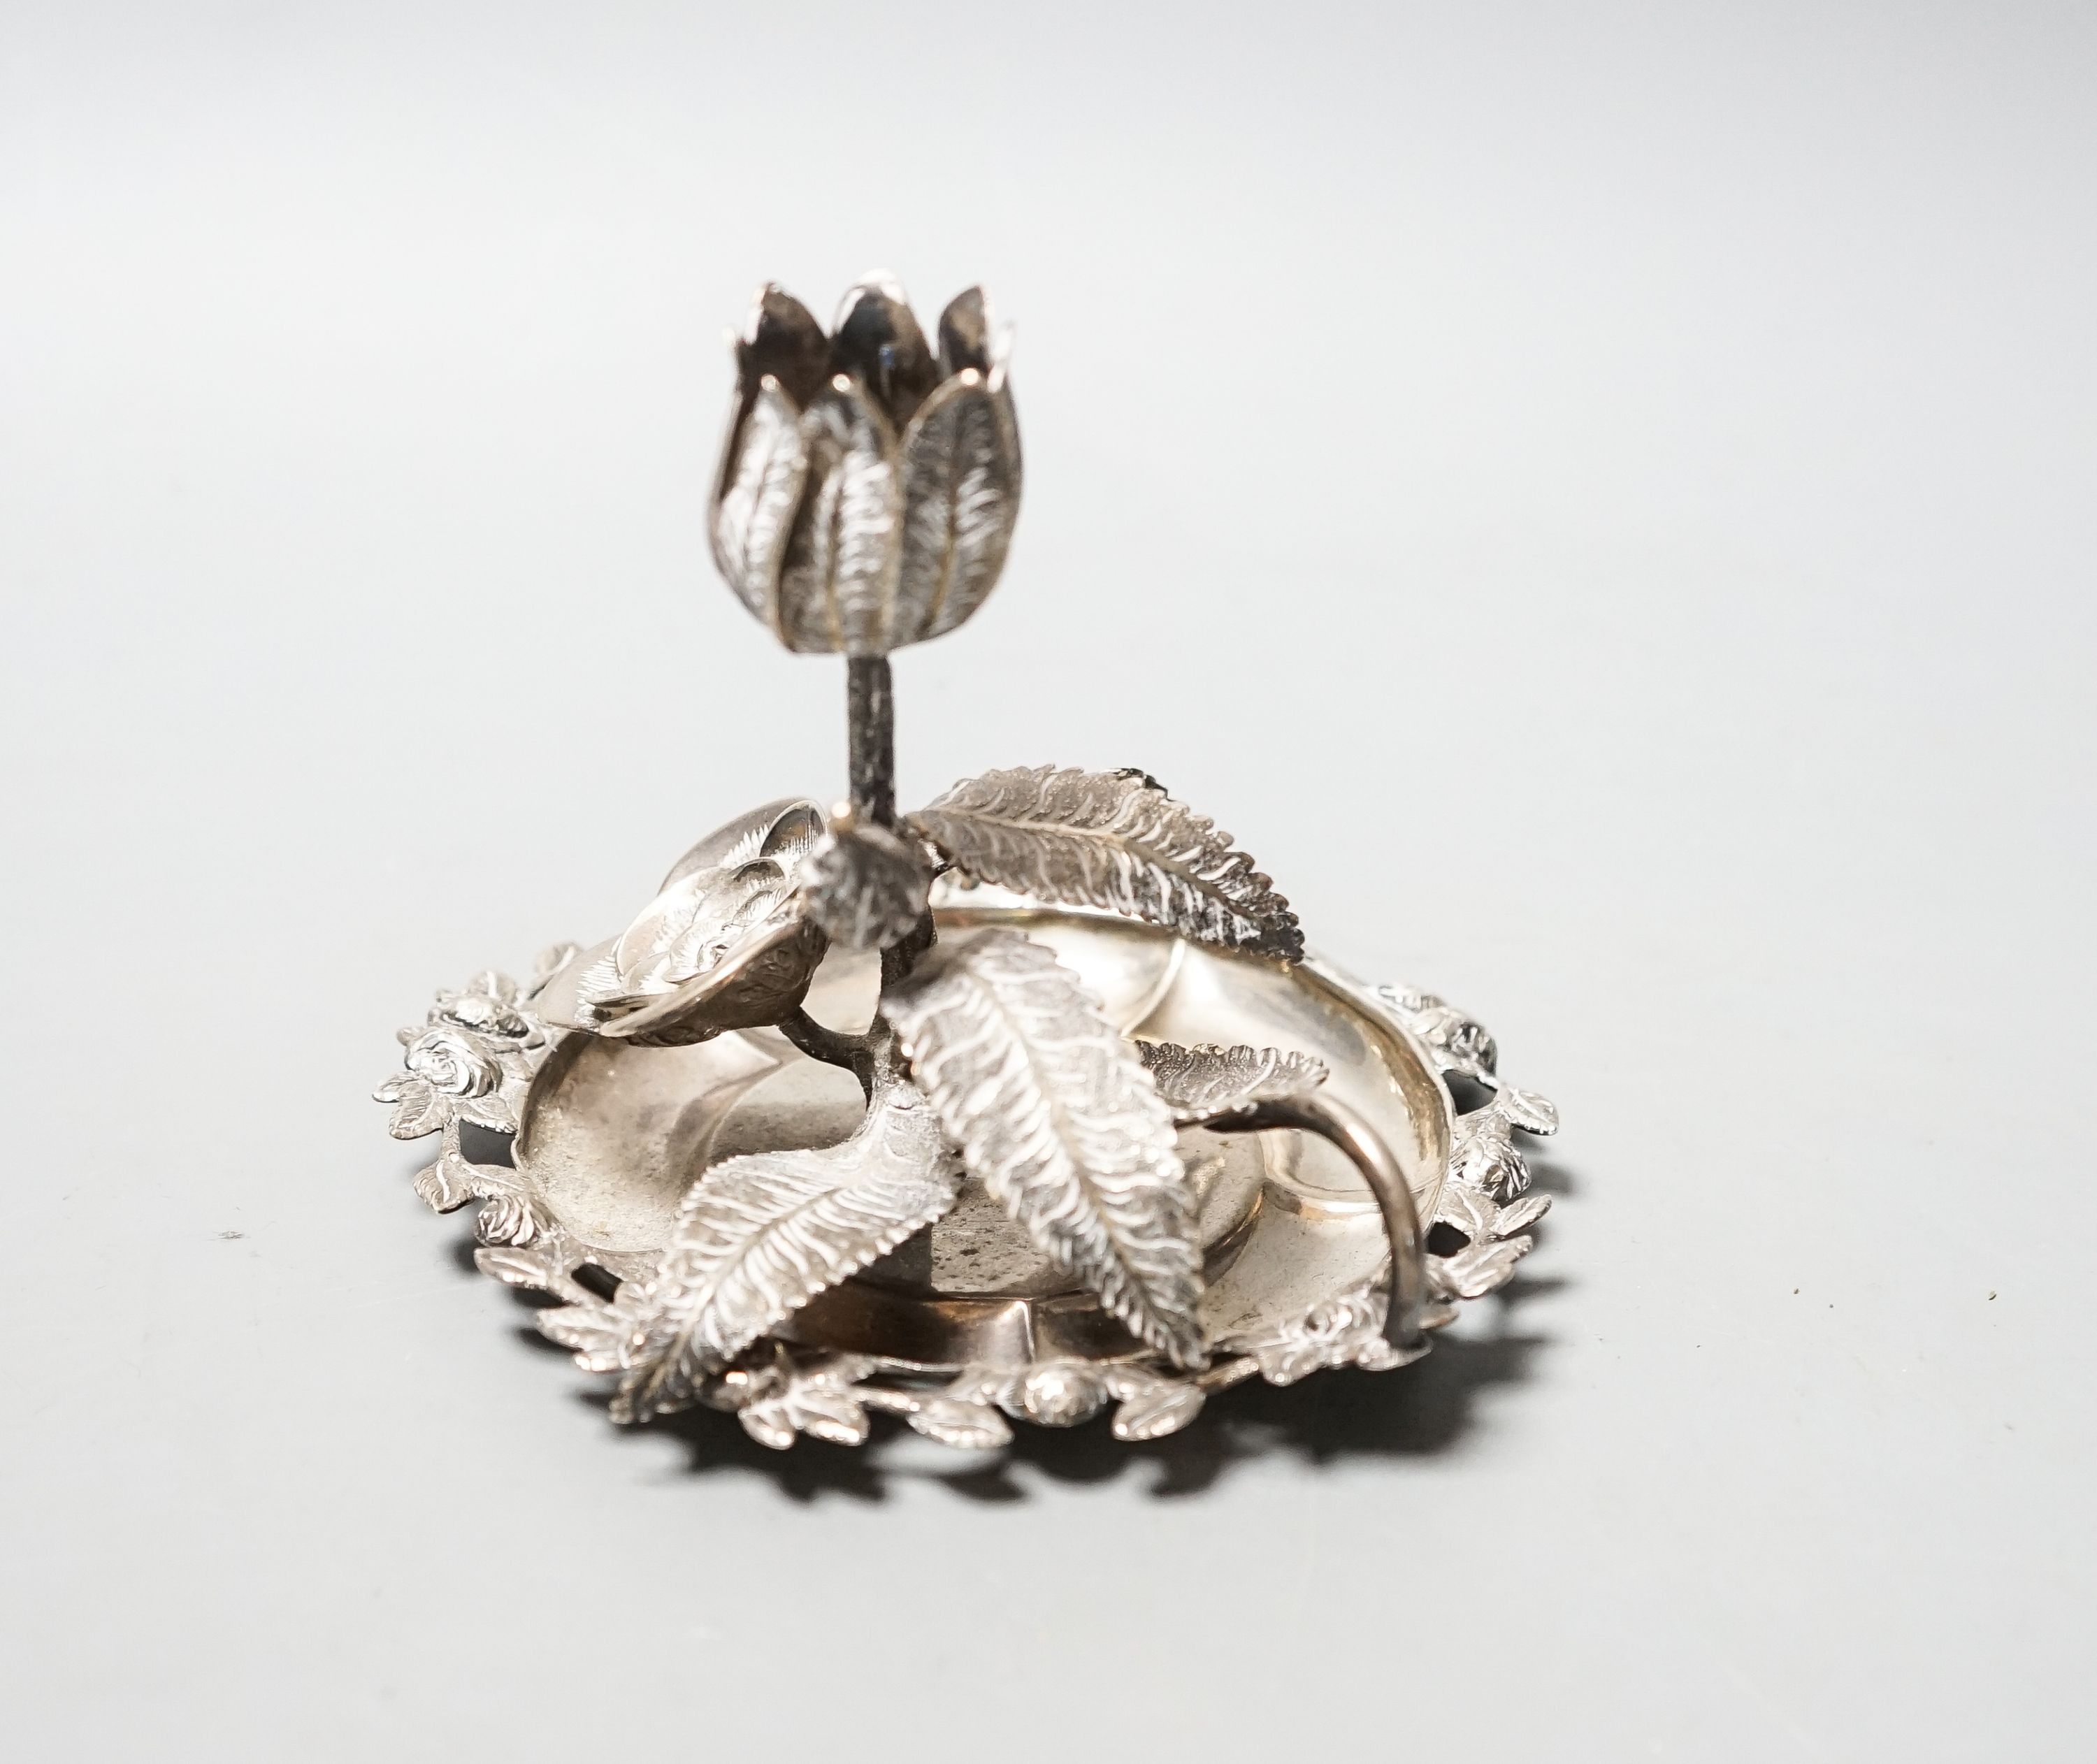 A George IV silver ‘rose’ chamberstick by Sampson Mordan and George Riddle, London, 1829, diameter 11.5cm, 186 grams.